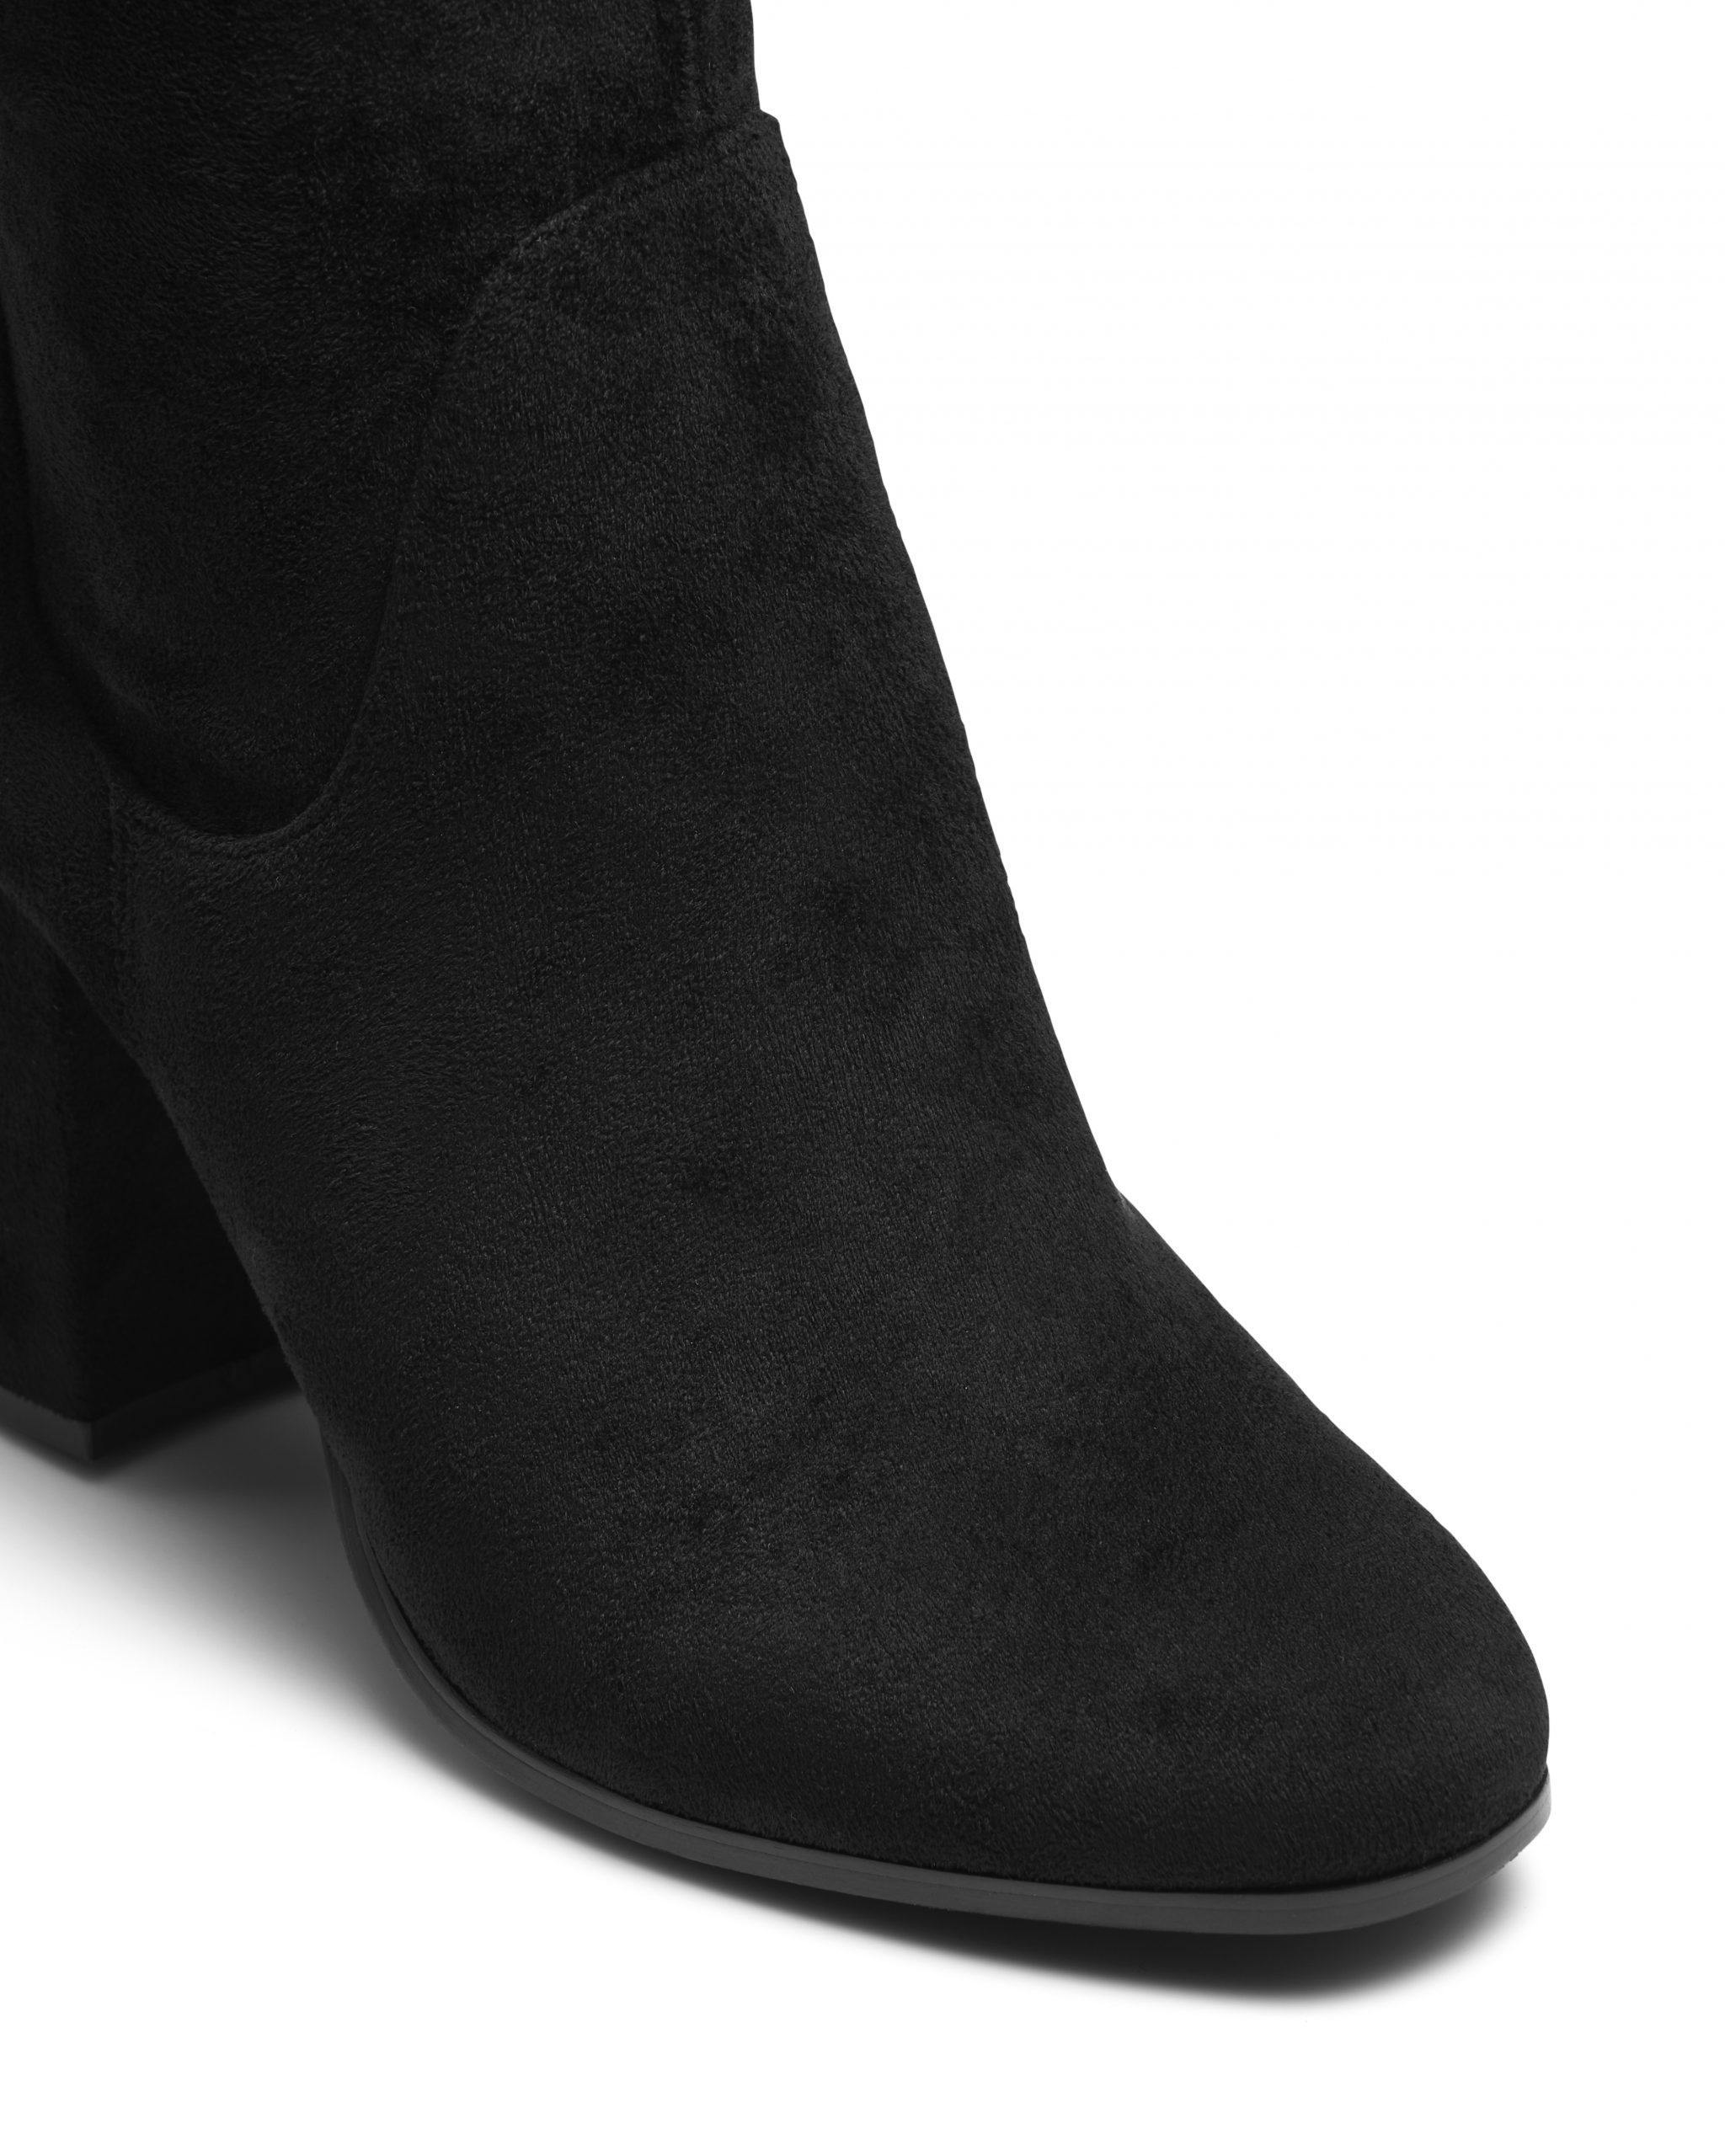 Therapy Shoes Hanover Black | Women's Boots | Over The Knee 